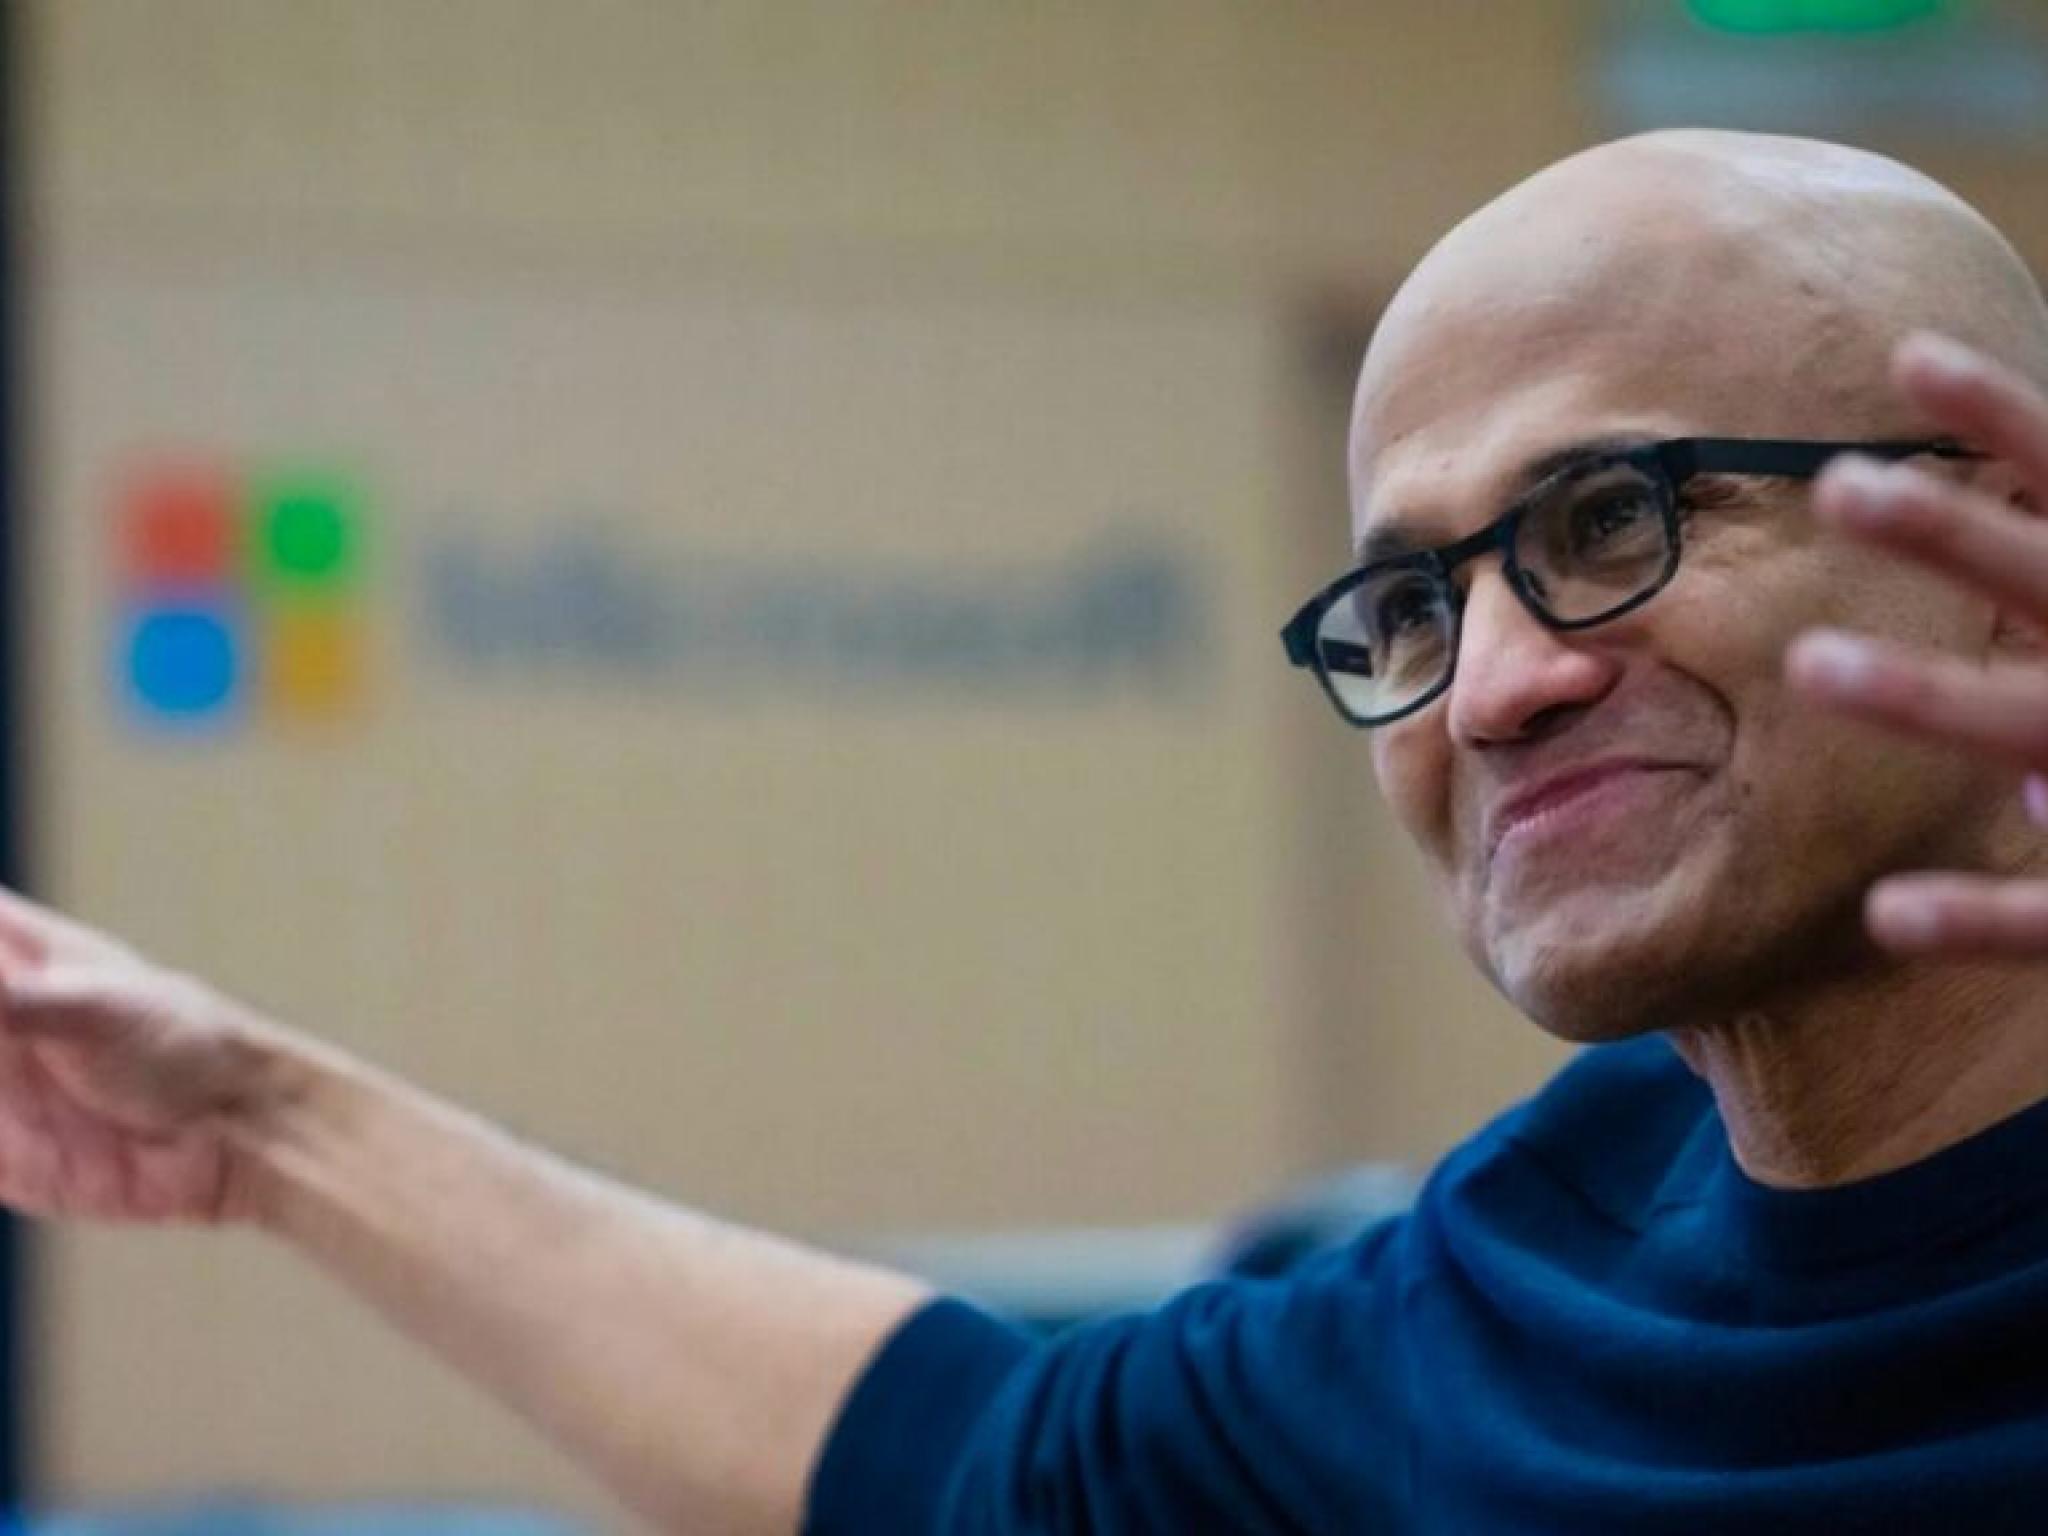  satya-nadella-microsoft-leading-ai-arms-race-says-tech-bull-amid-redmonds-slew-of-new-copilot-announcements 